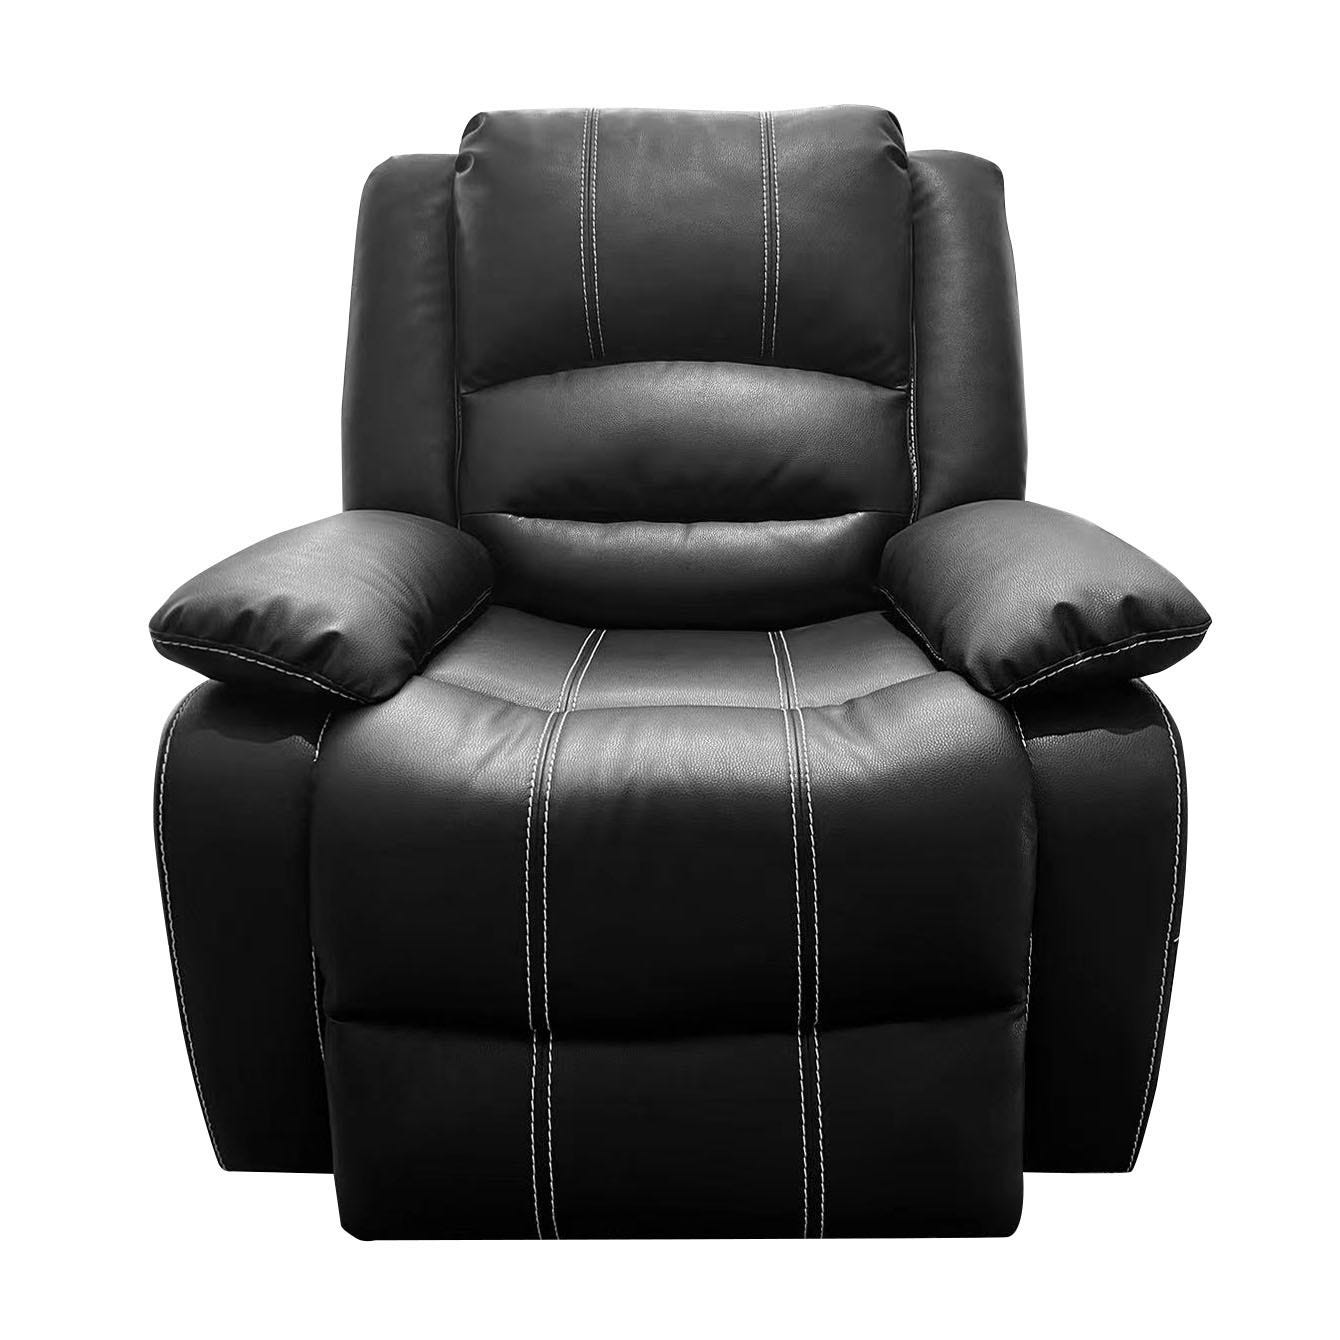 Black leather recliner chair with white stitching.